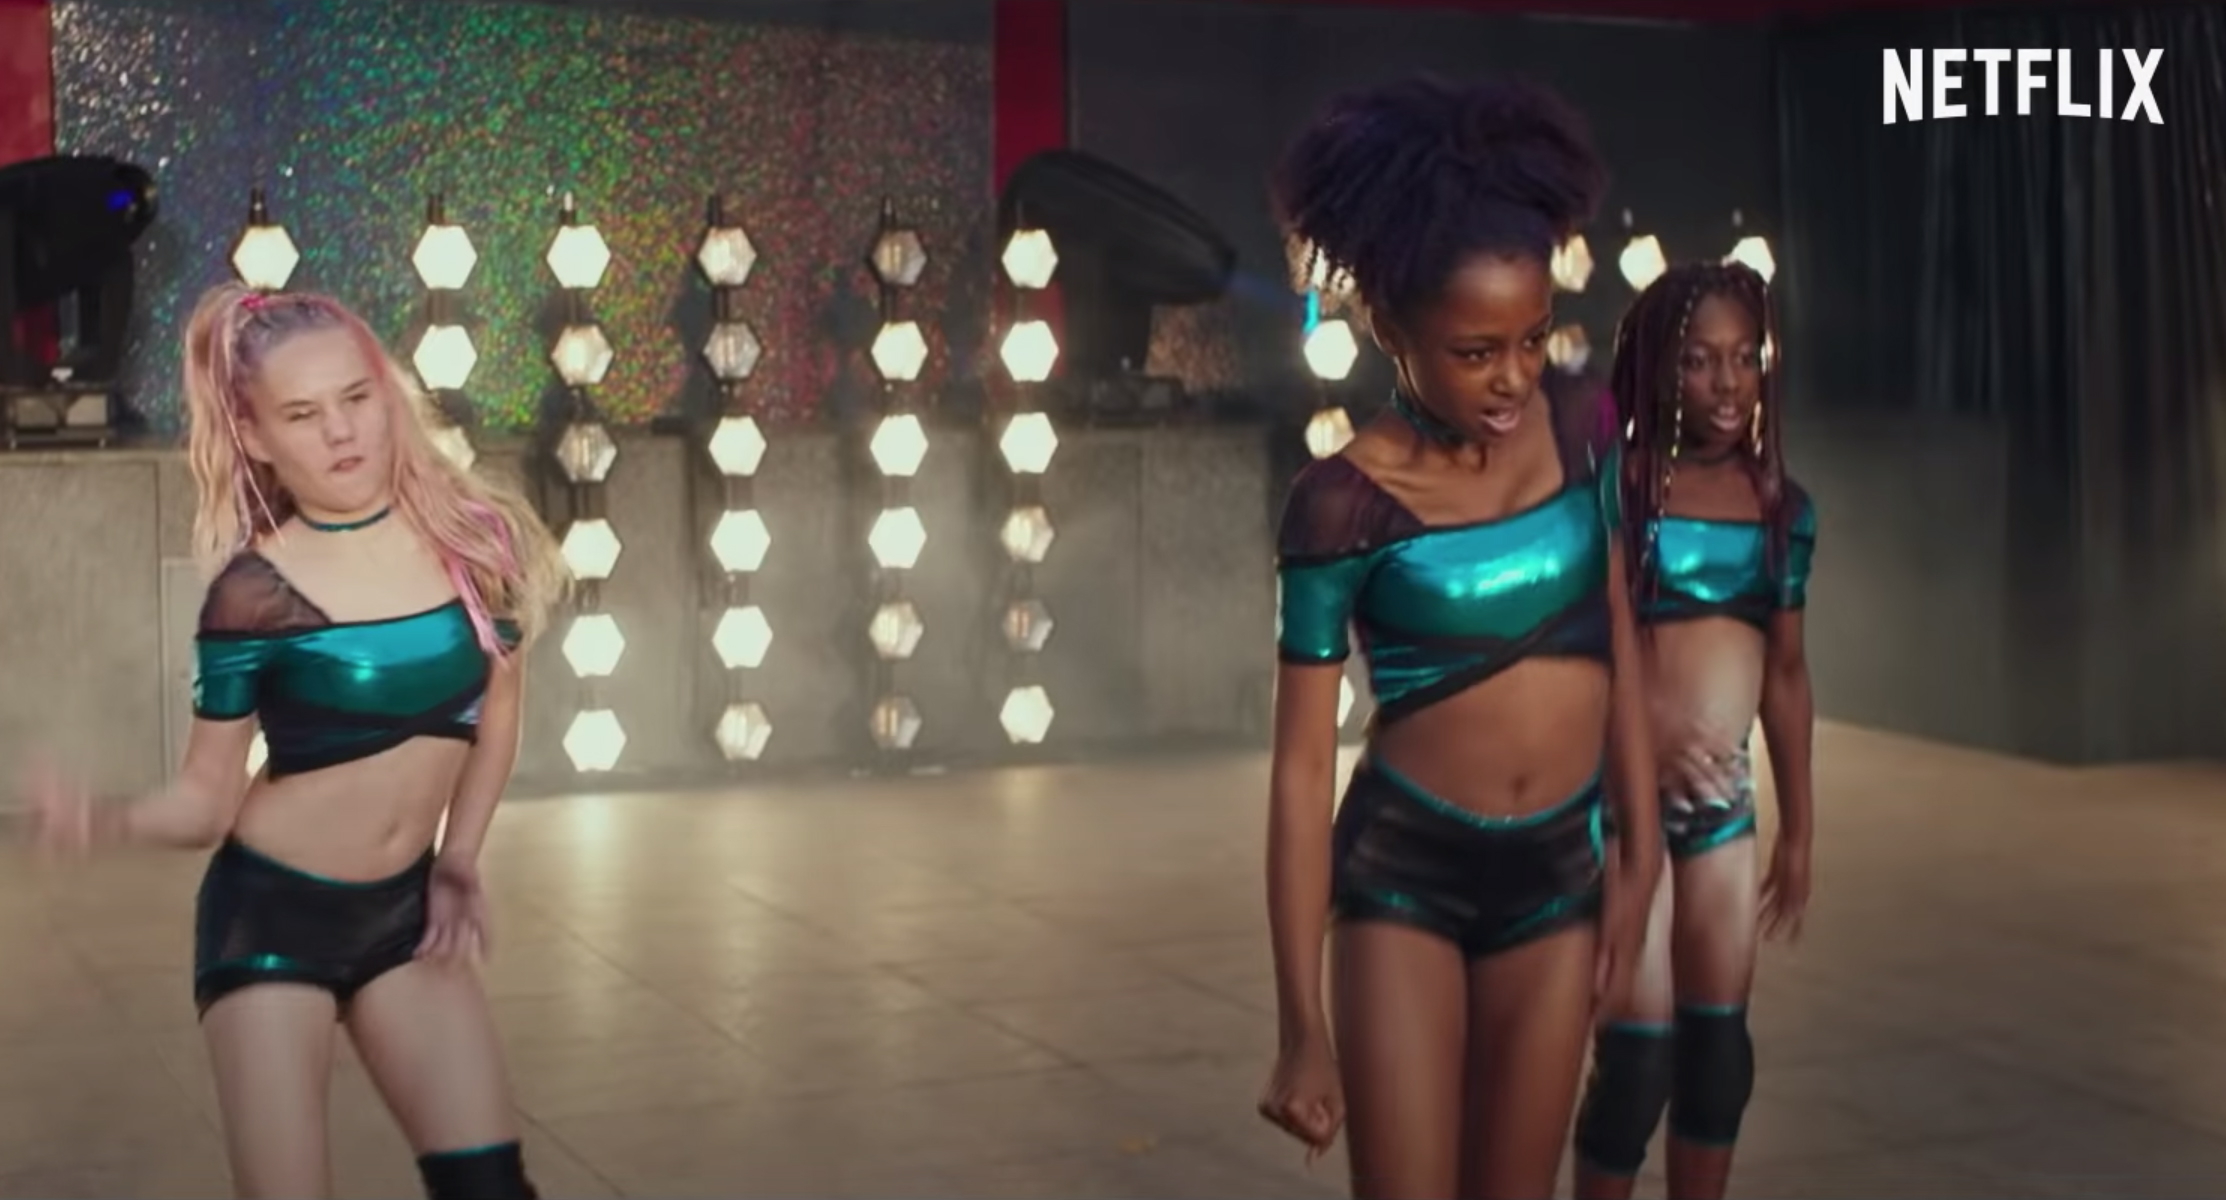 Netflix indicted over 'Cuties' film; Kelly Rowland pregnant;